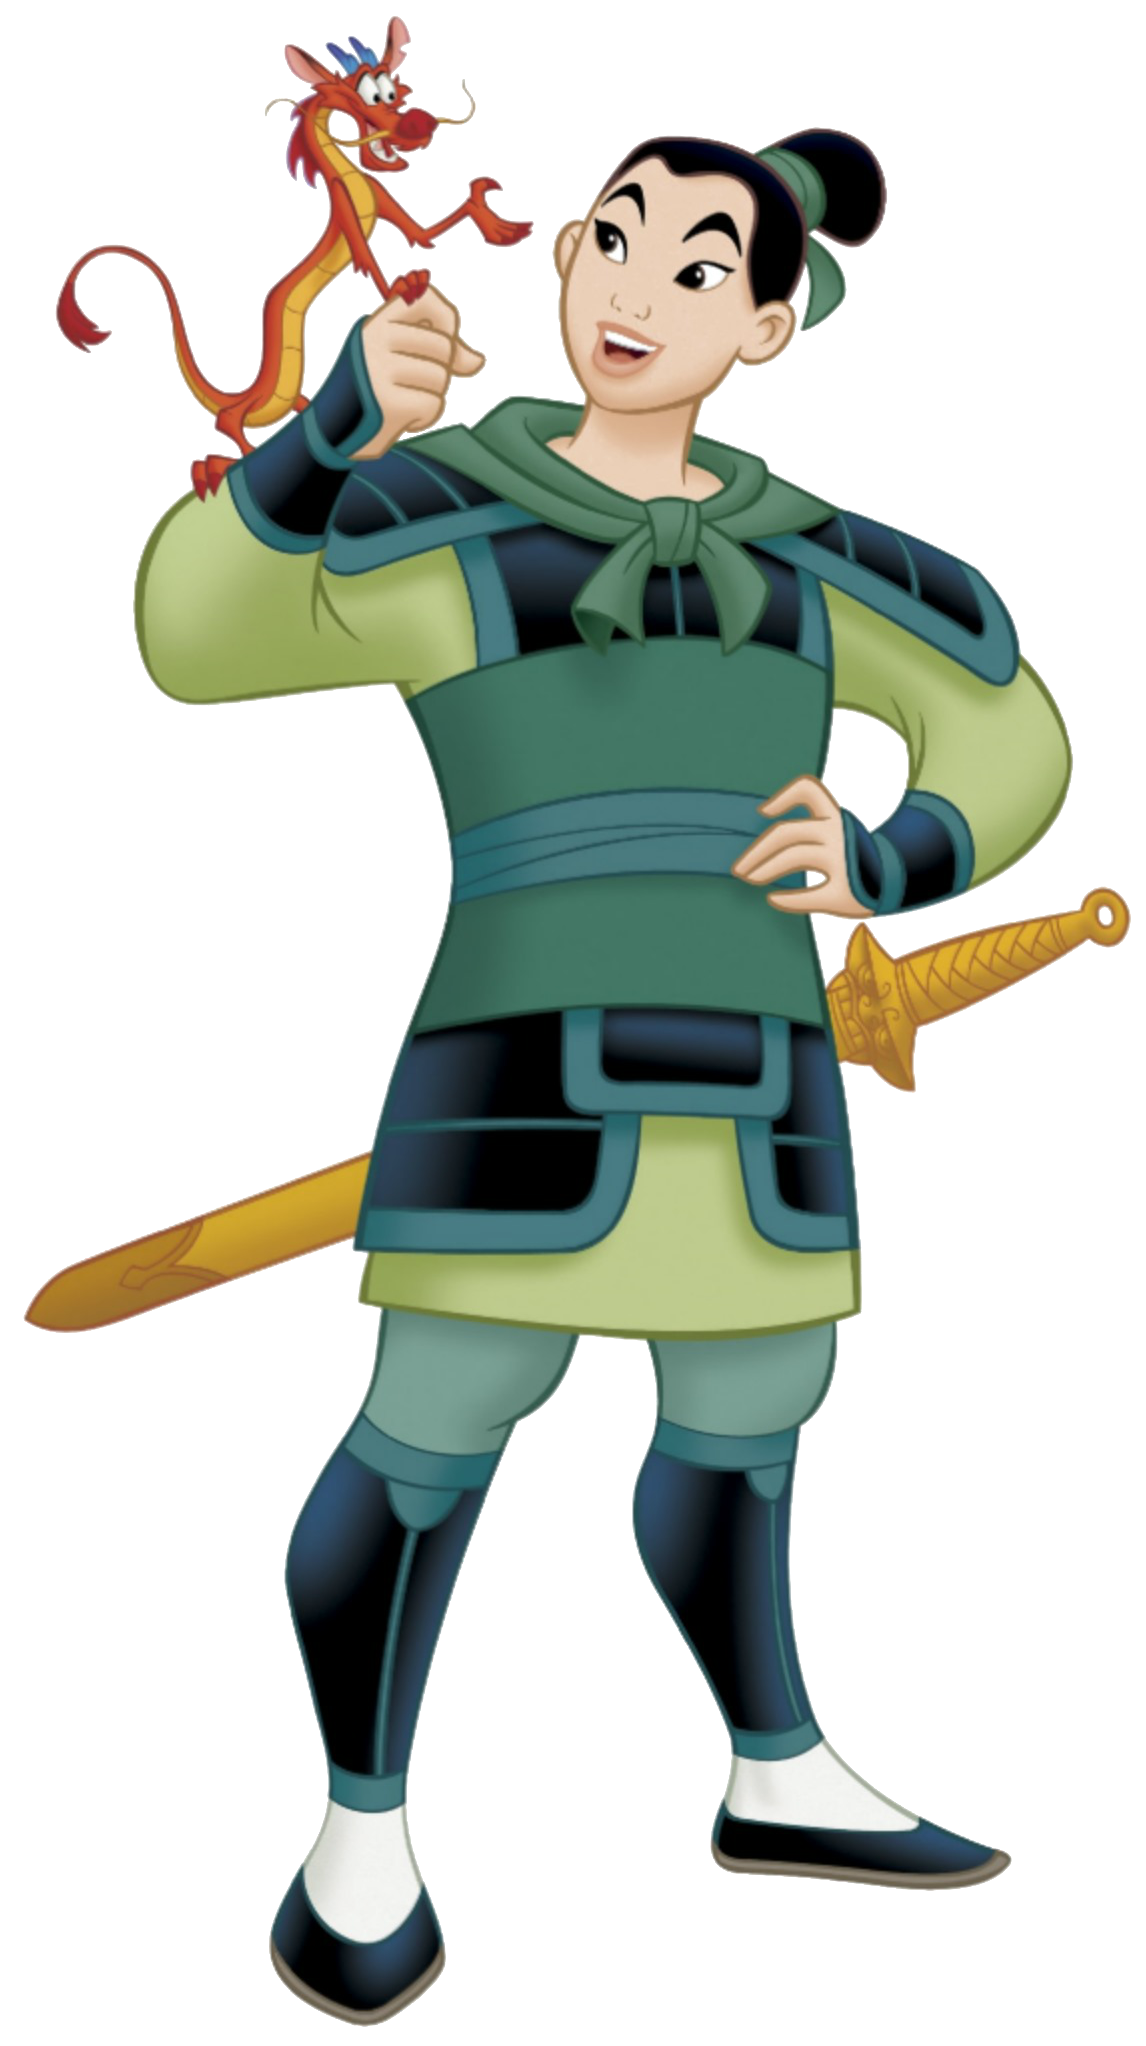 Warrior clipart secondary. Mulan as ping and